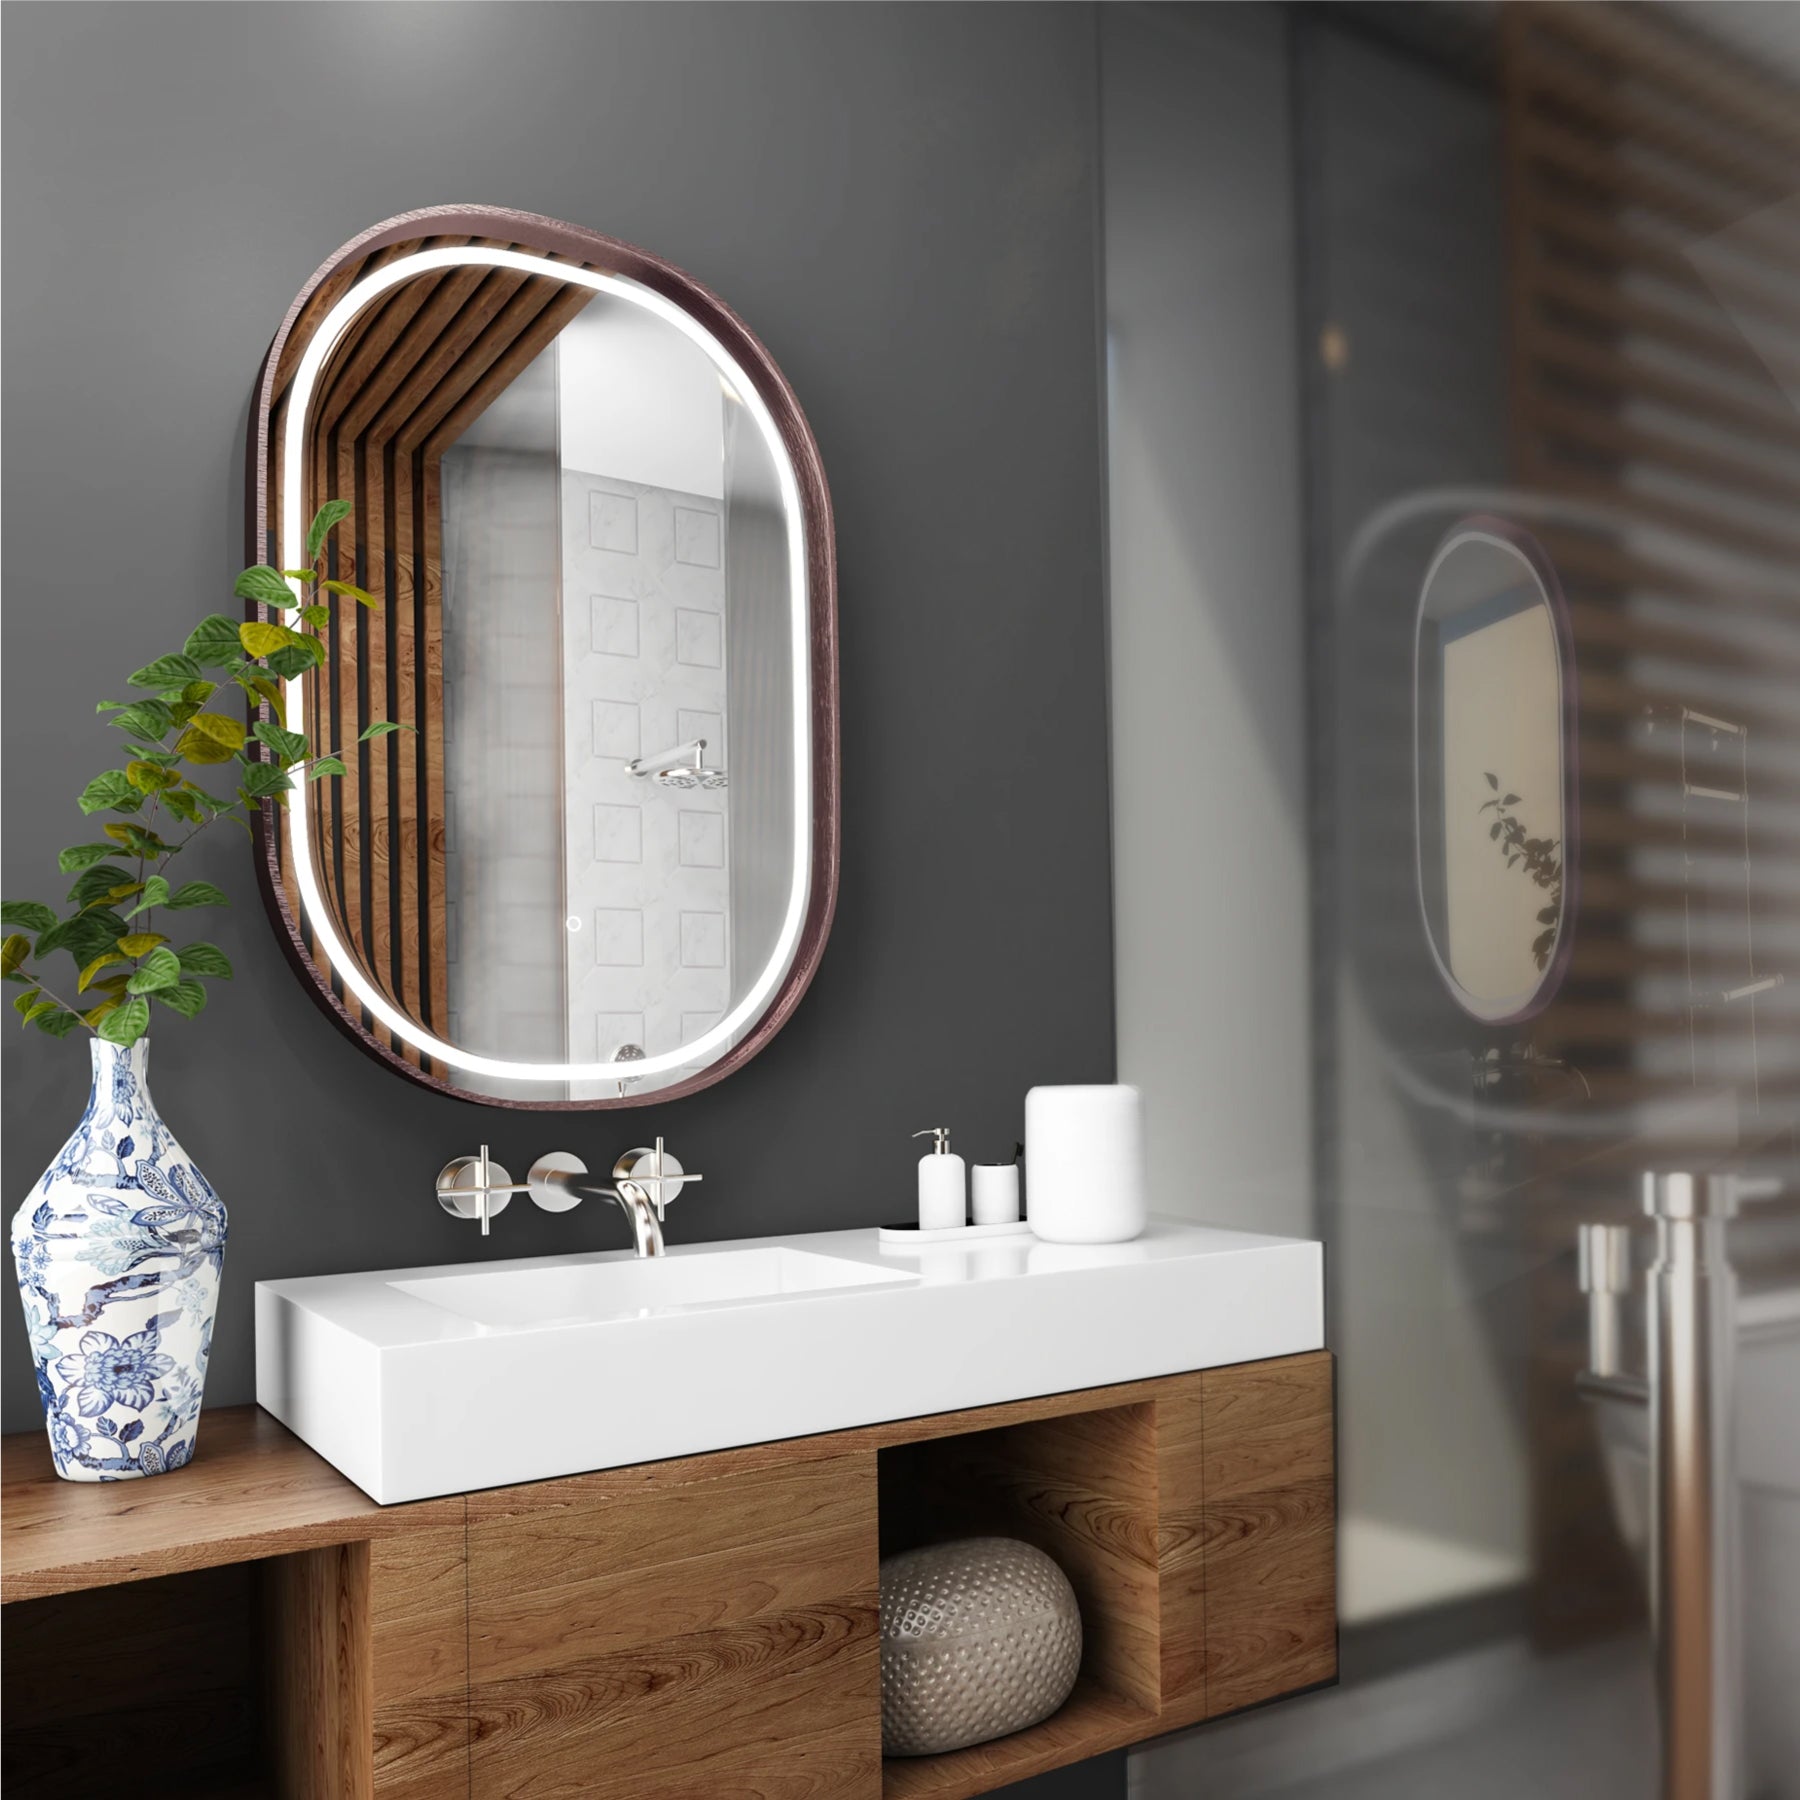 24 in. X 36 in. LED Lighted Bathroom Vanity Mirror with Rose Gold Frame, Anti-Fog Adjustable Color Temperature & Remembrance, Lighted Makeup Mirrors, Evo Style